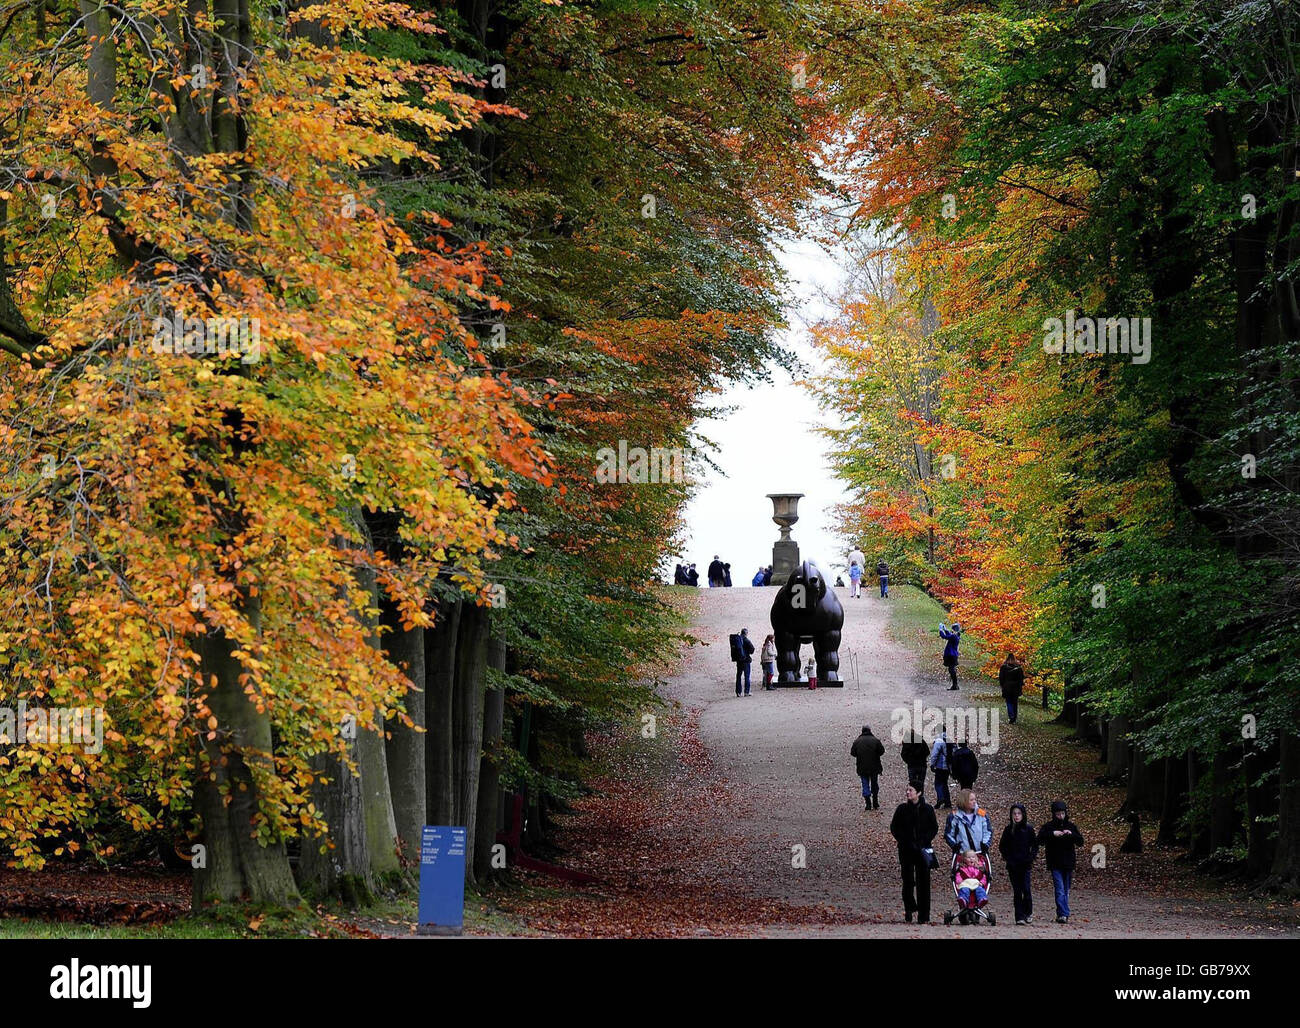 Visitors to Chatsworth House in the Peak District, enjoy the autumn colours in the house grounds. Stock Photo